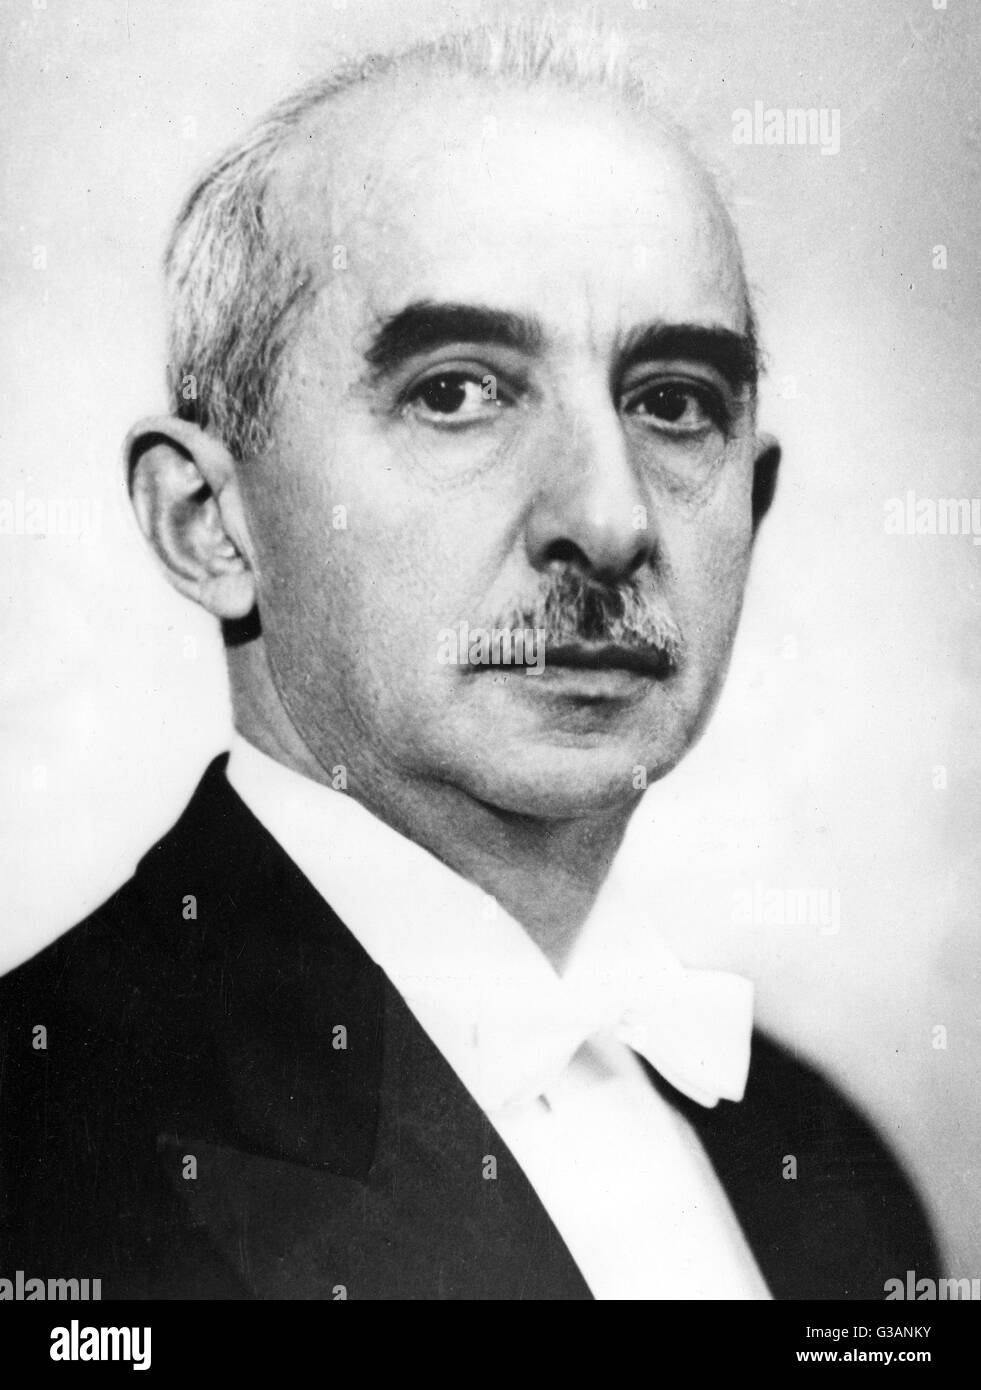 Mustafa Ismet Inonu (1884-1973) - Turkish Army General, Prime Minister and the second President of the Republic of Turkey. He is widely referred to as &quot;Milli Sef&quot; (National Chief), a title he bestowed upon himself when he was elected as the Pres Stock Photo